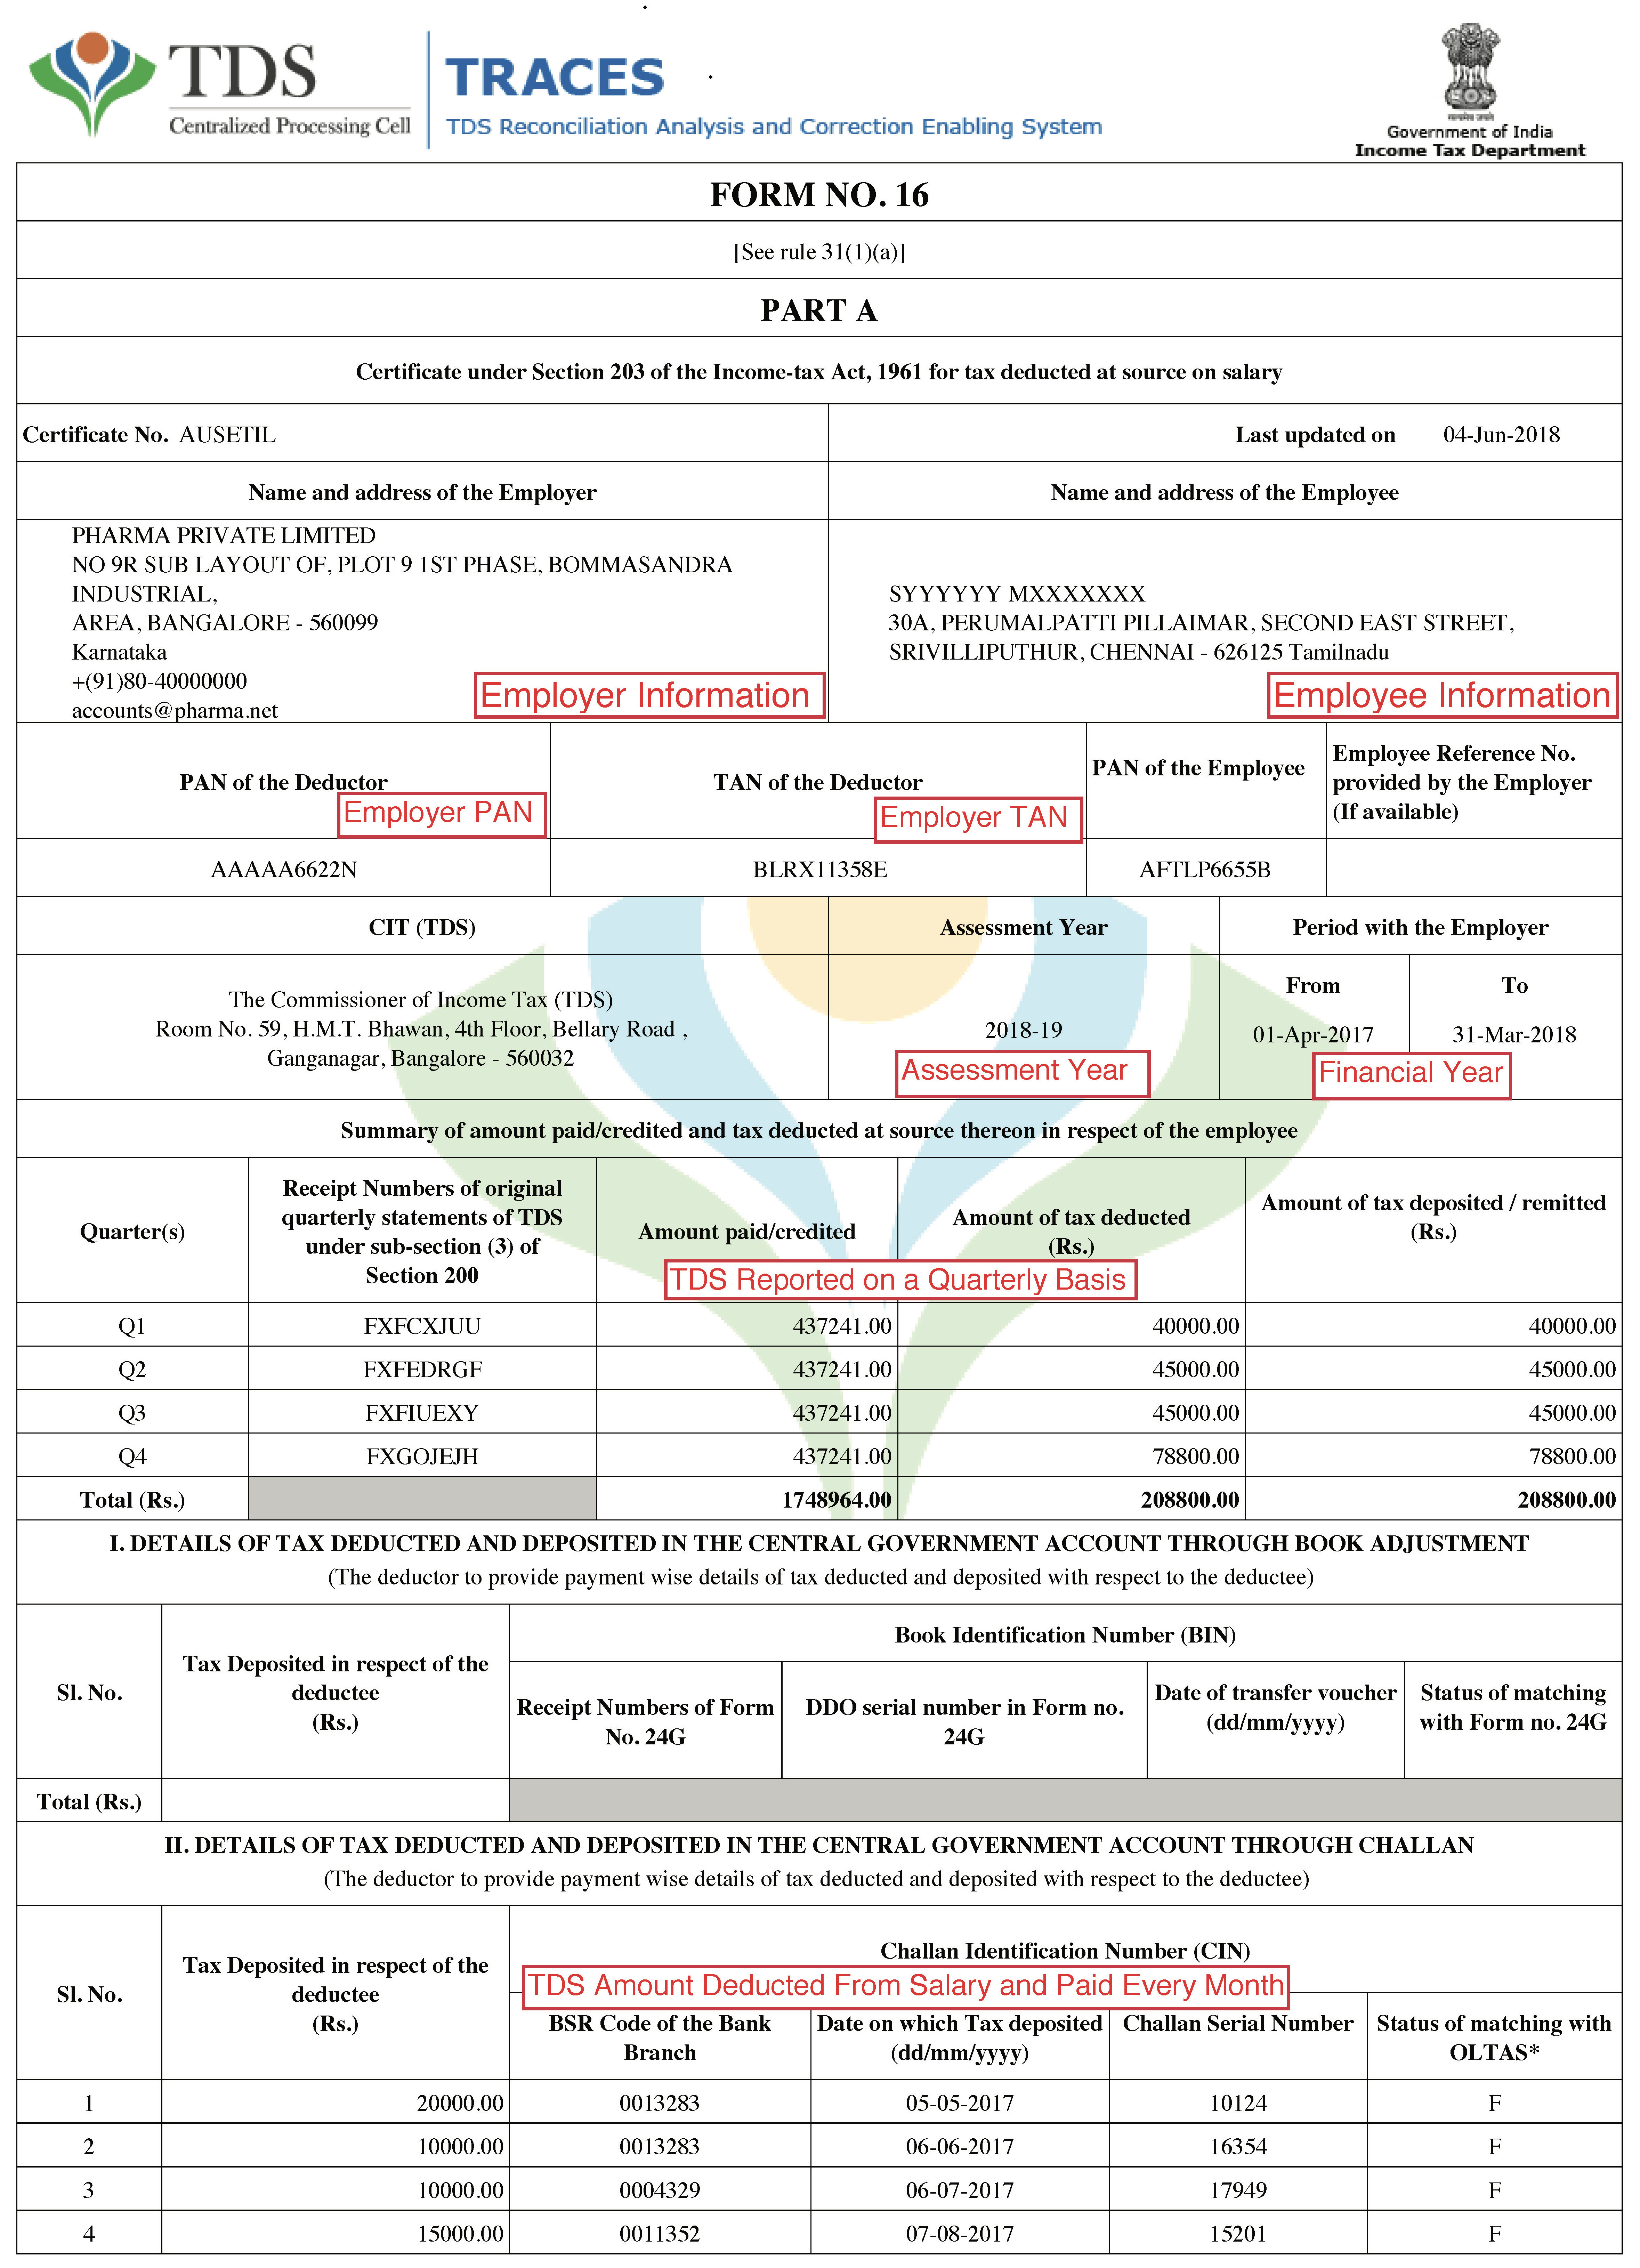 Sample Form 16 Invest in Mutual Funds, Fixed Deposits, Bonds, Online